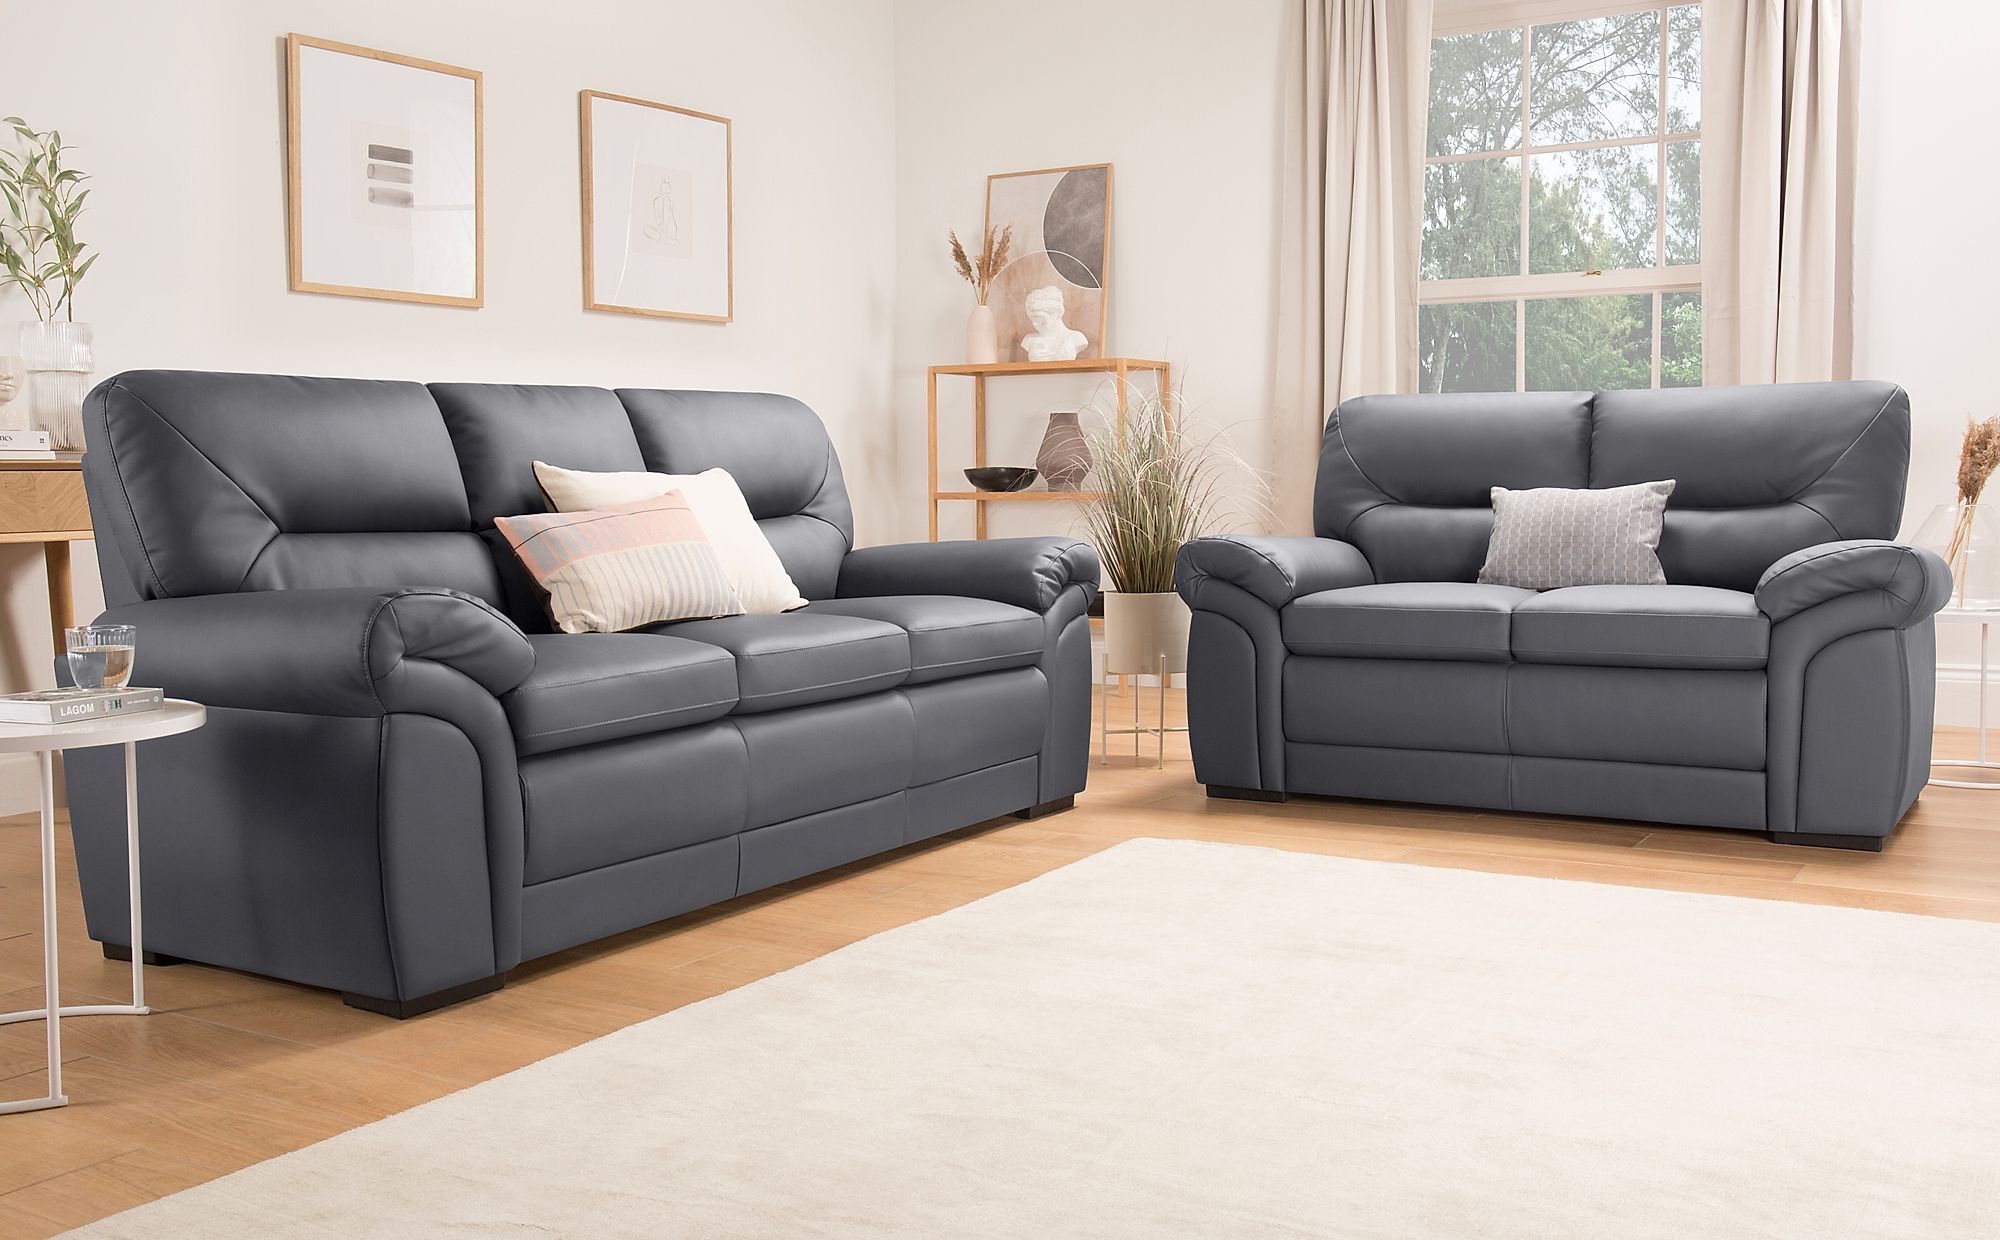 leather transitional sofa sets with dropdown back